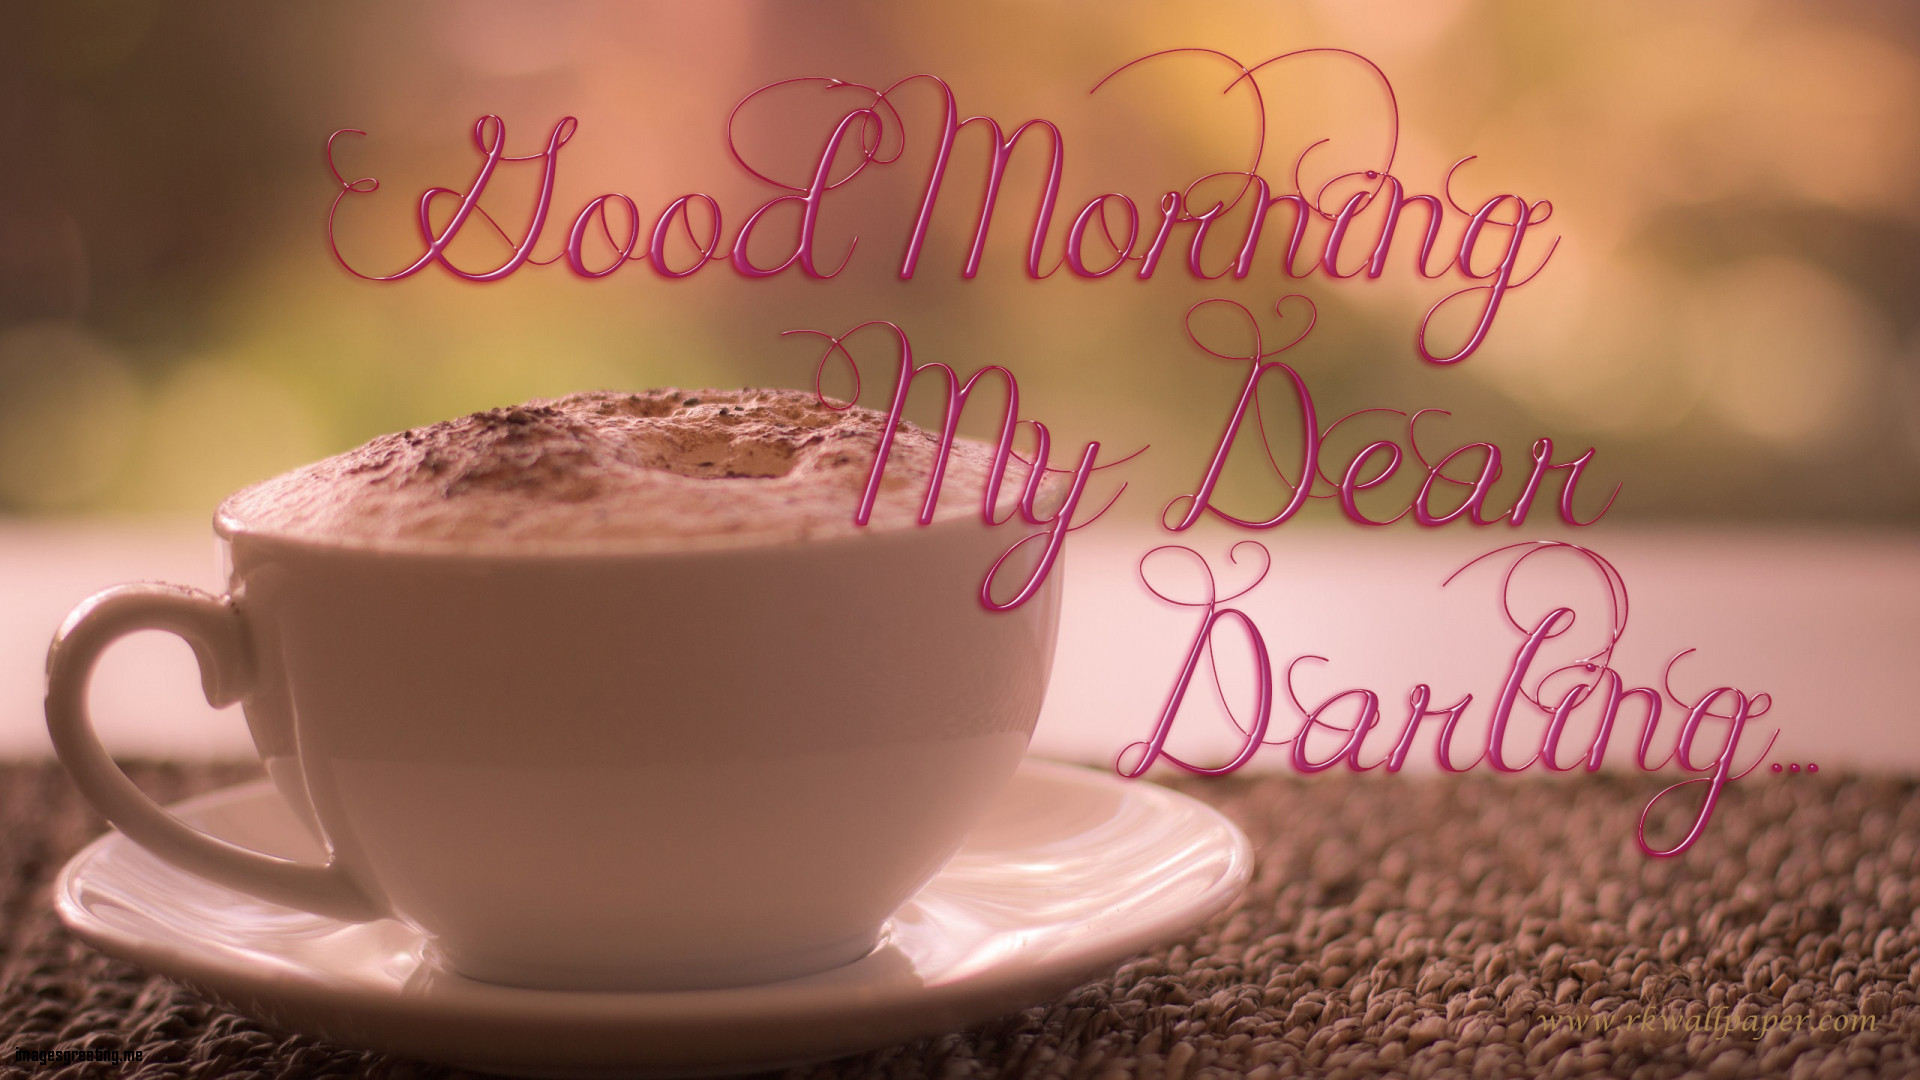 Beautiful Good Morning Wallpapers - Have Nice Day Coffee , HD Wallpaper & Backgrounds